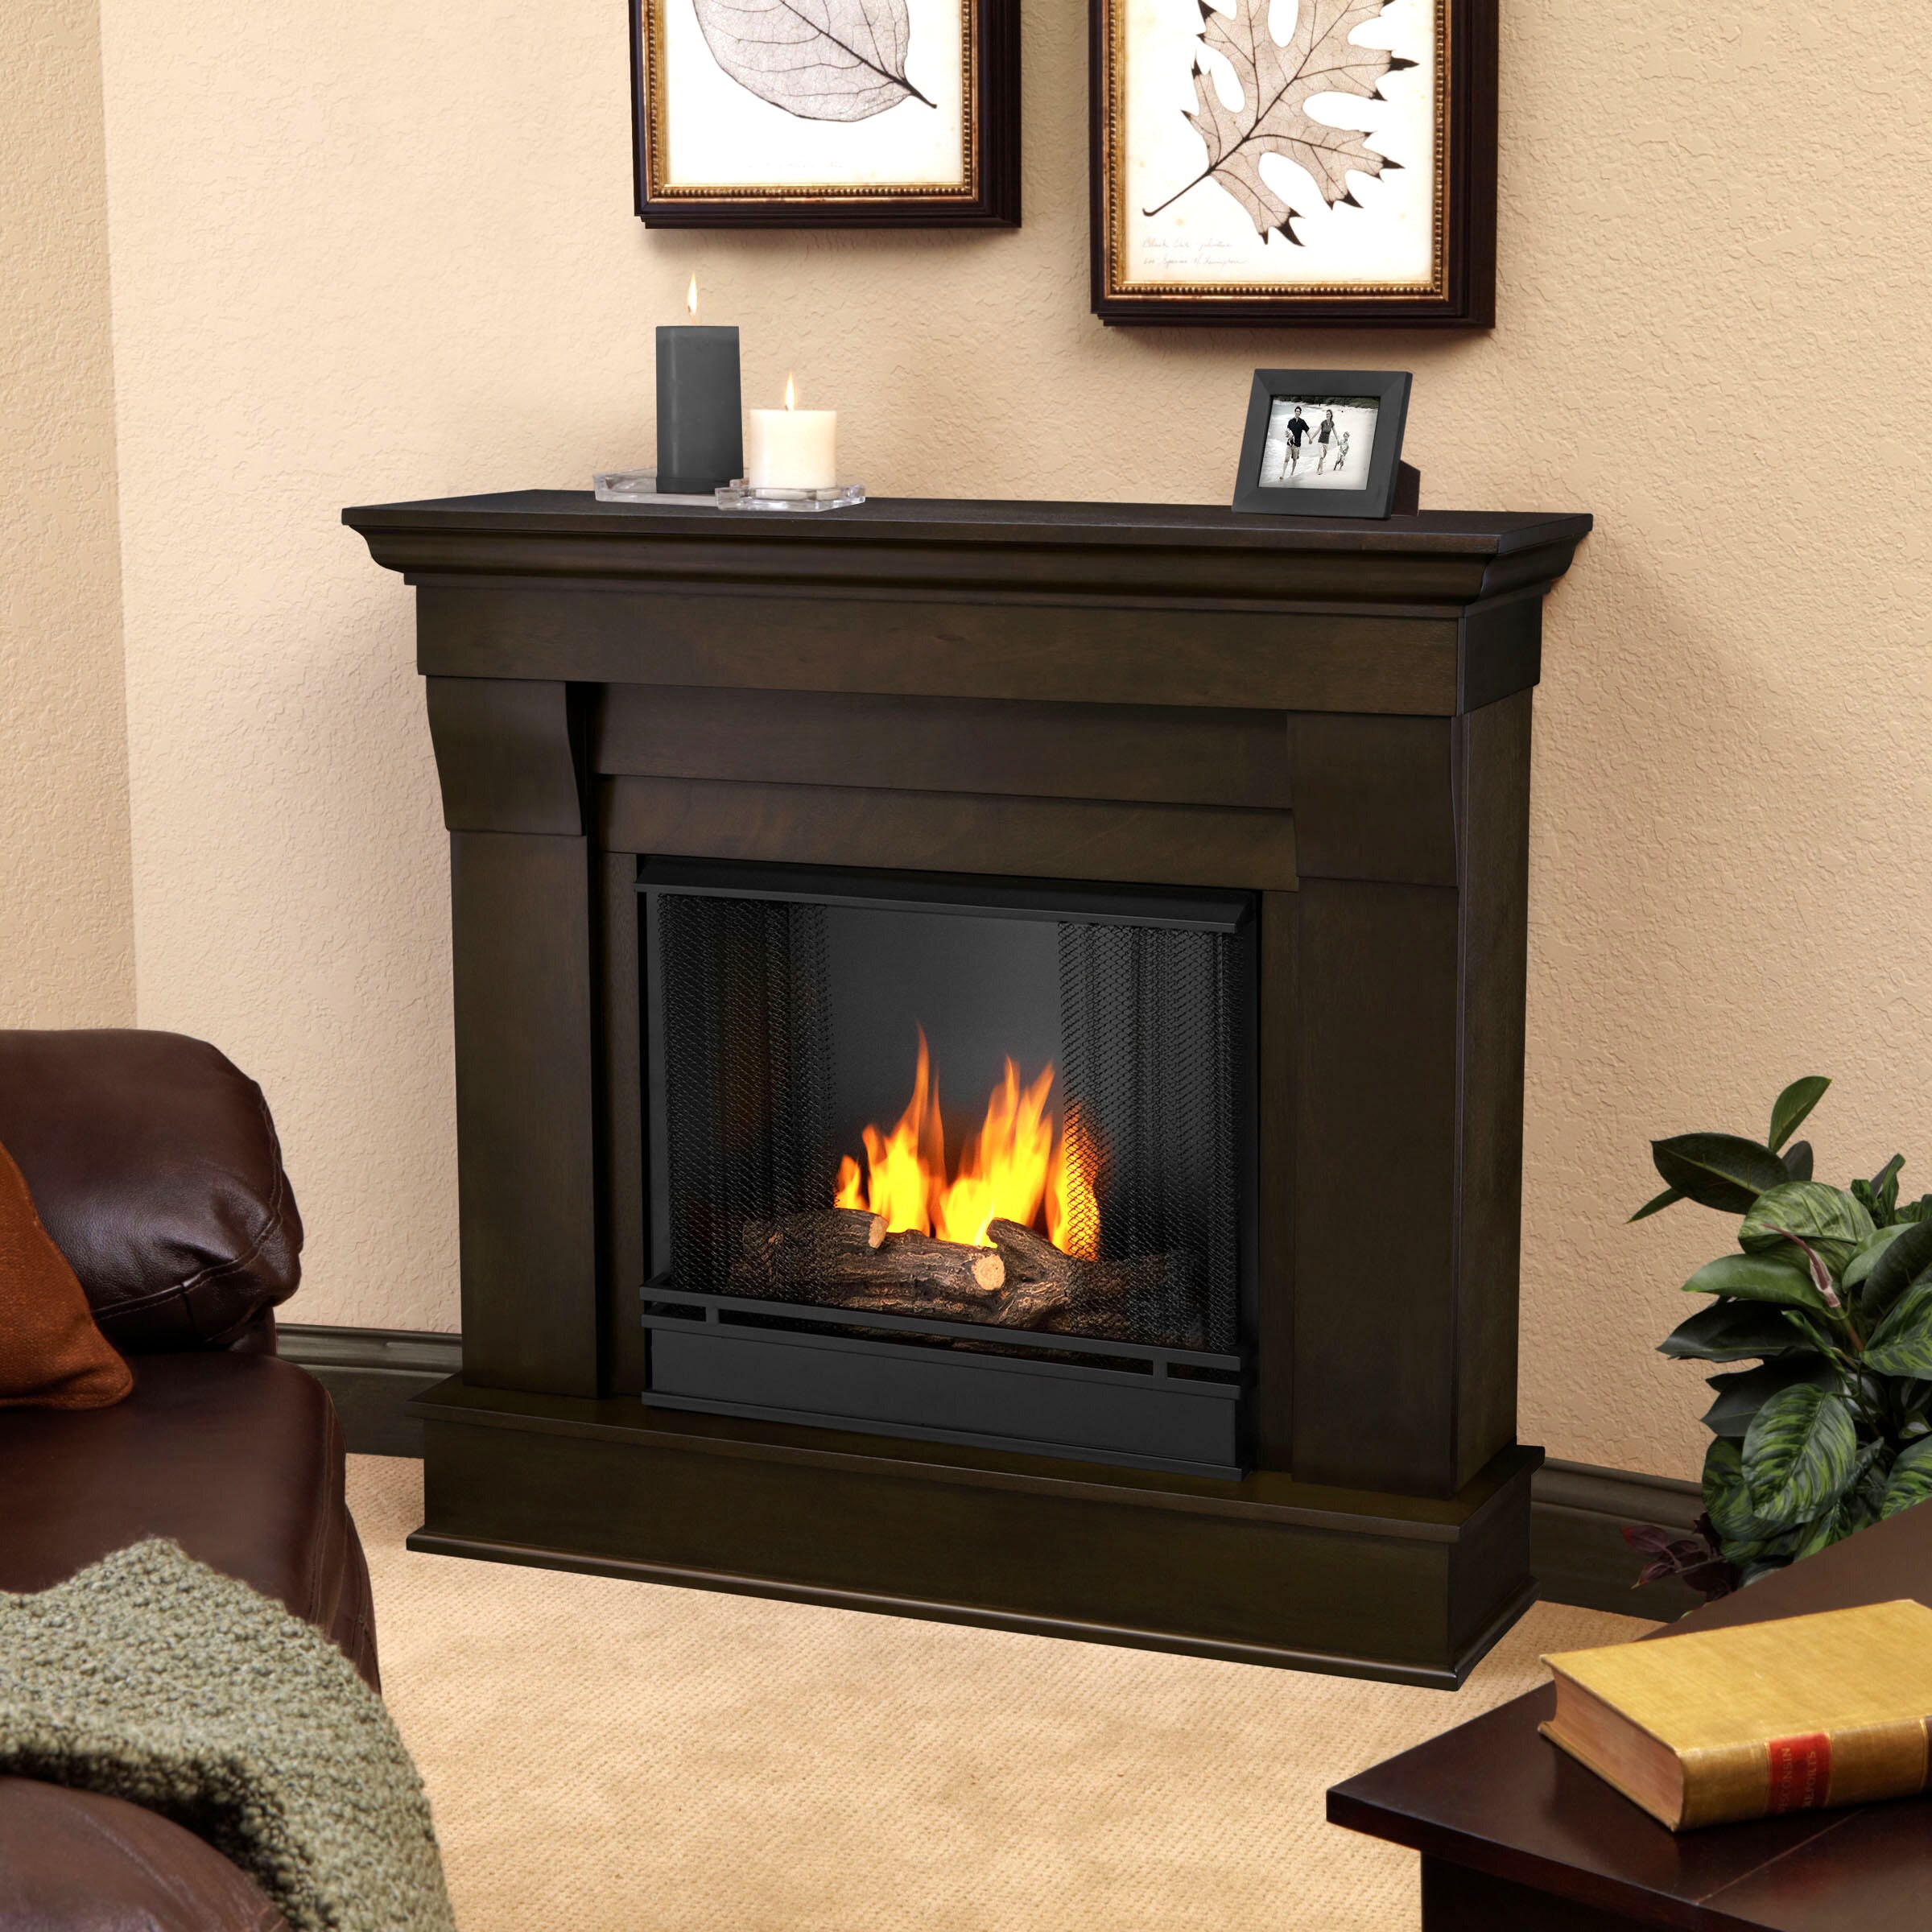 Real Flame Chateau Dark Walnut Gel Indoor Fireplace Today $412.99 5.0